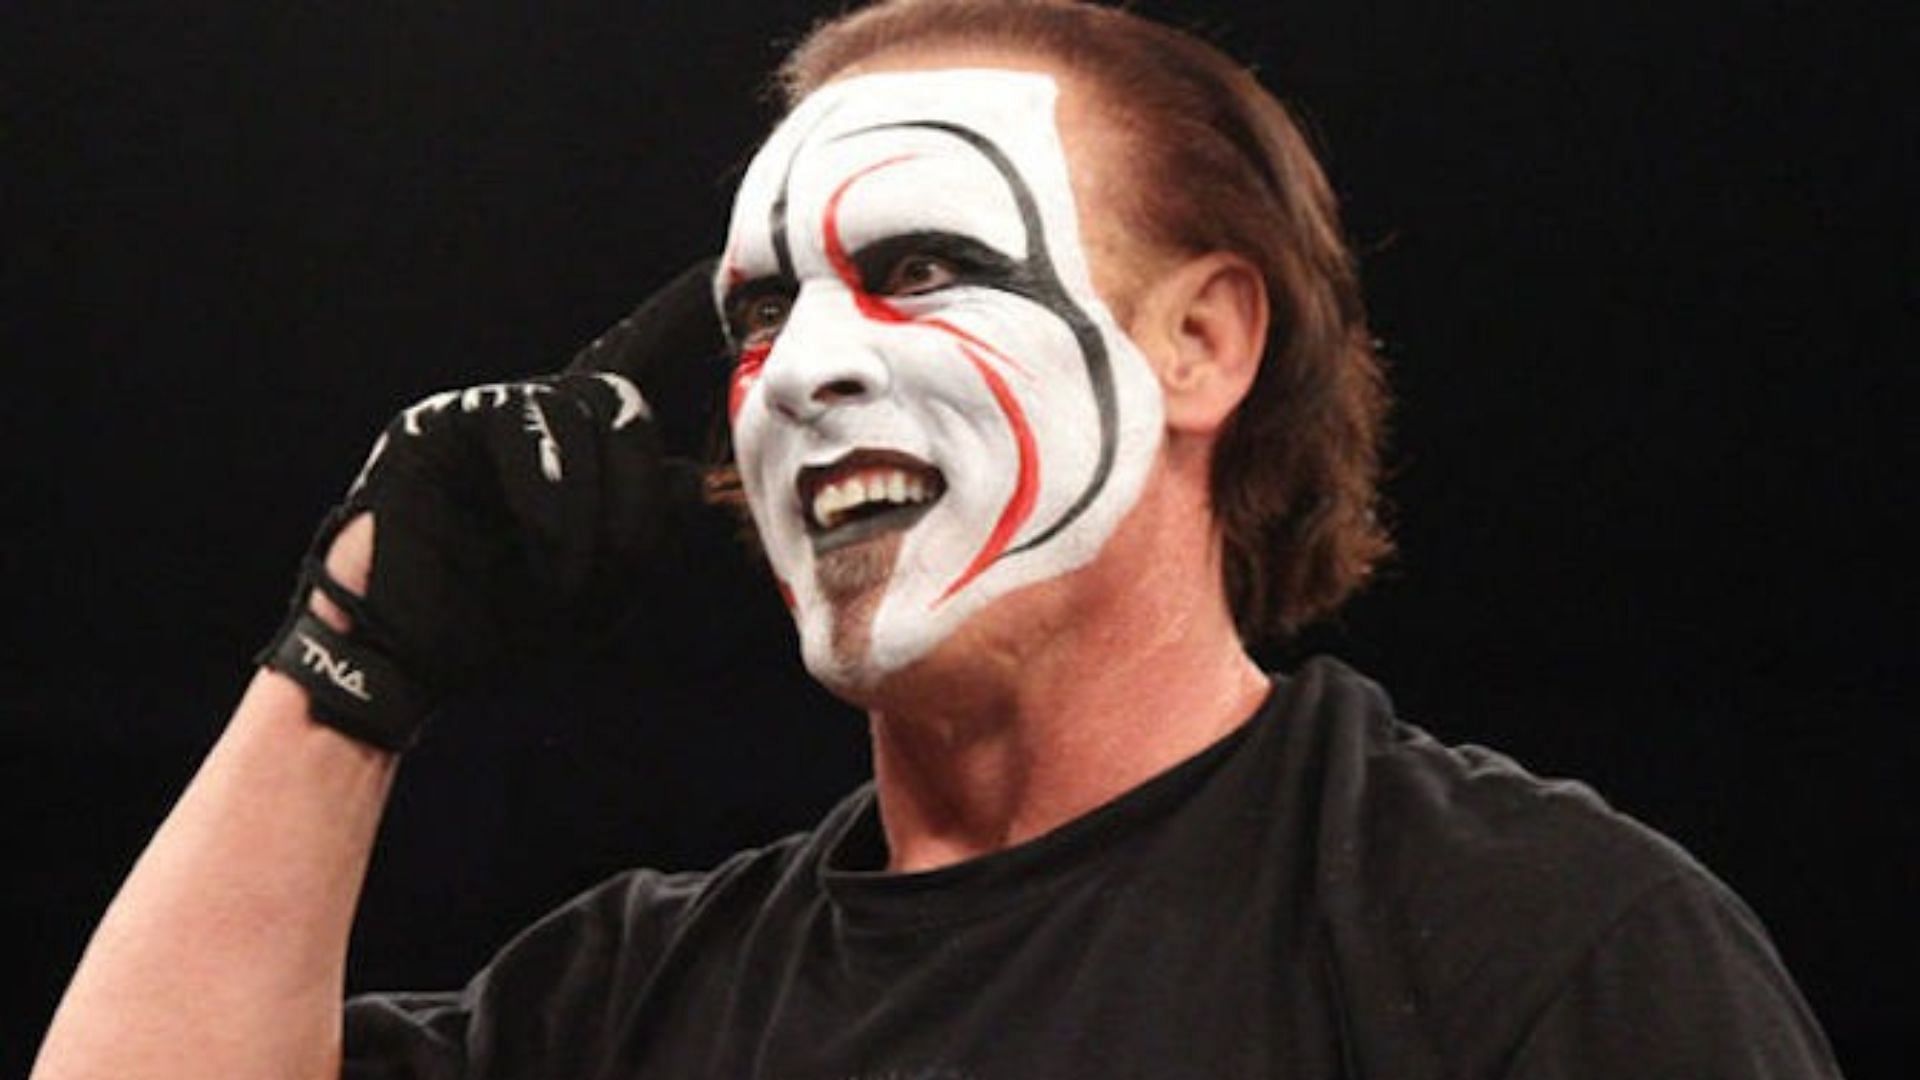 Sting is no stranger to attempting high-risk stunts.